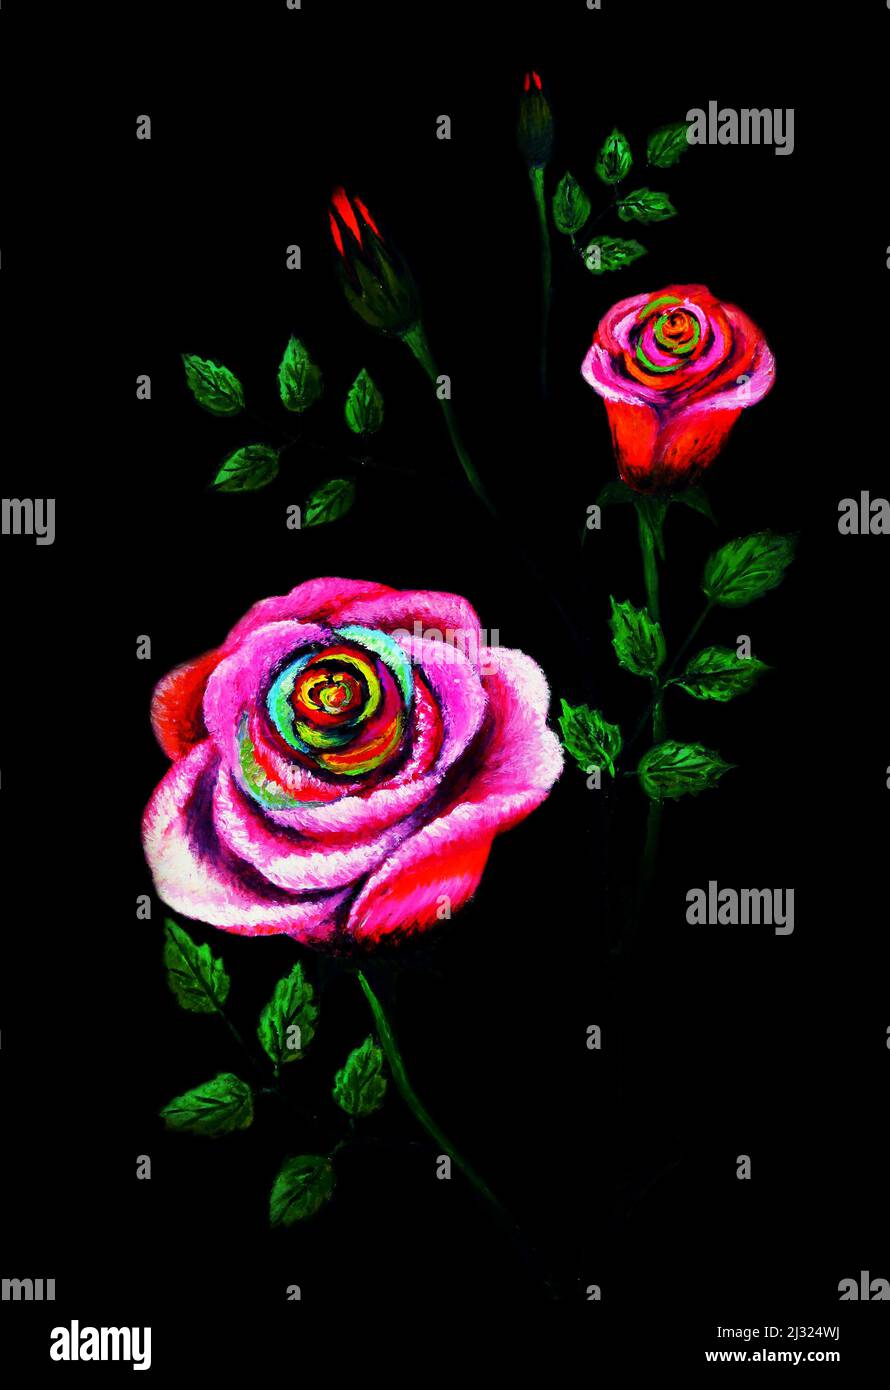 Oil painting on canvas of pink roses in various stages of bloom on black background Stock Photo